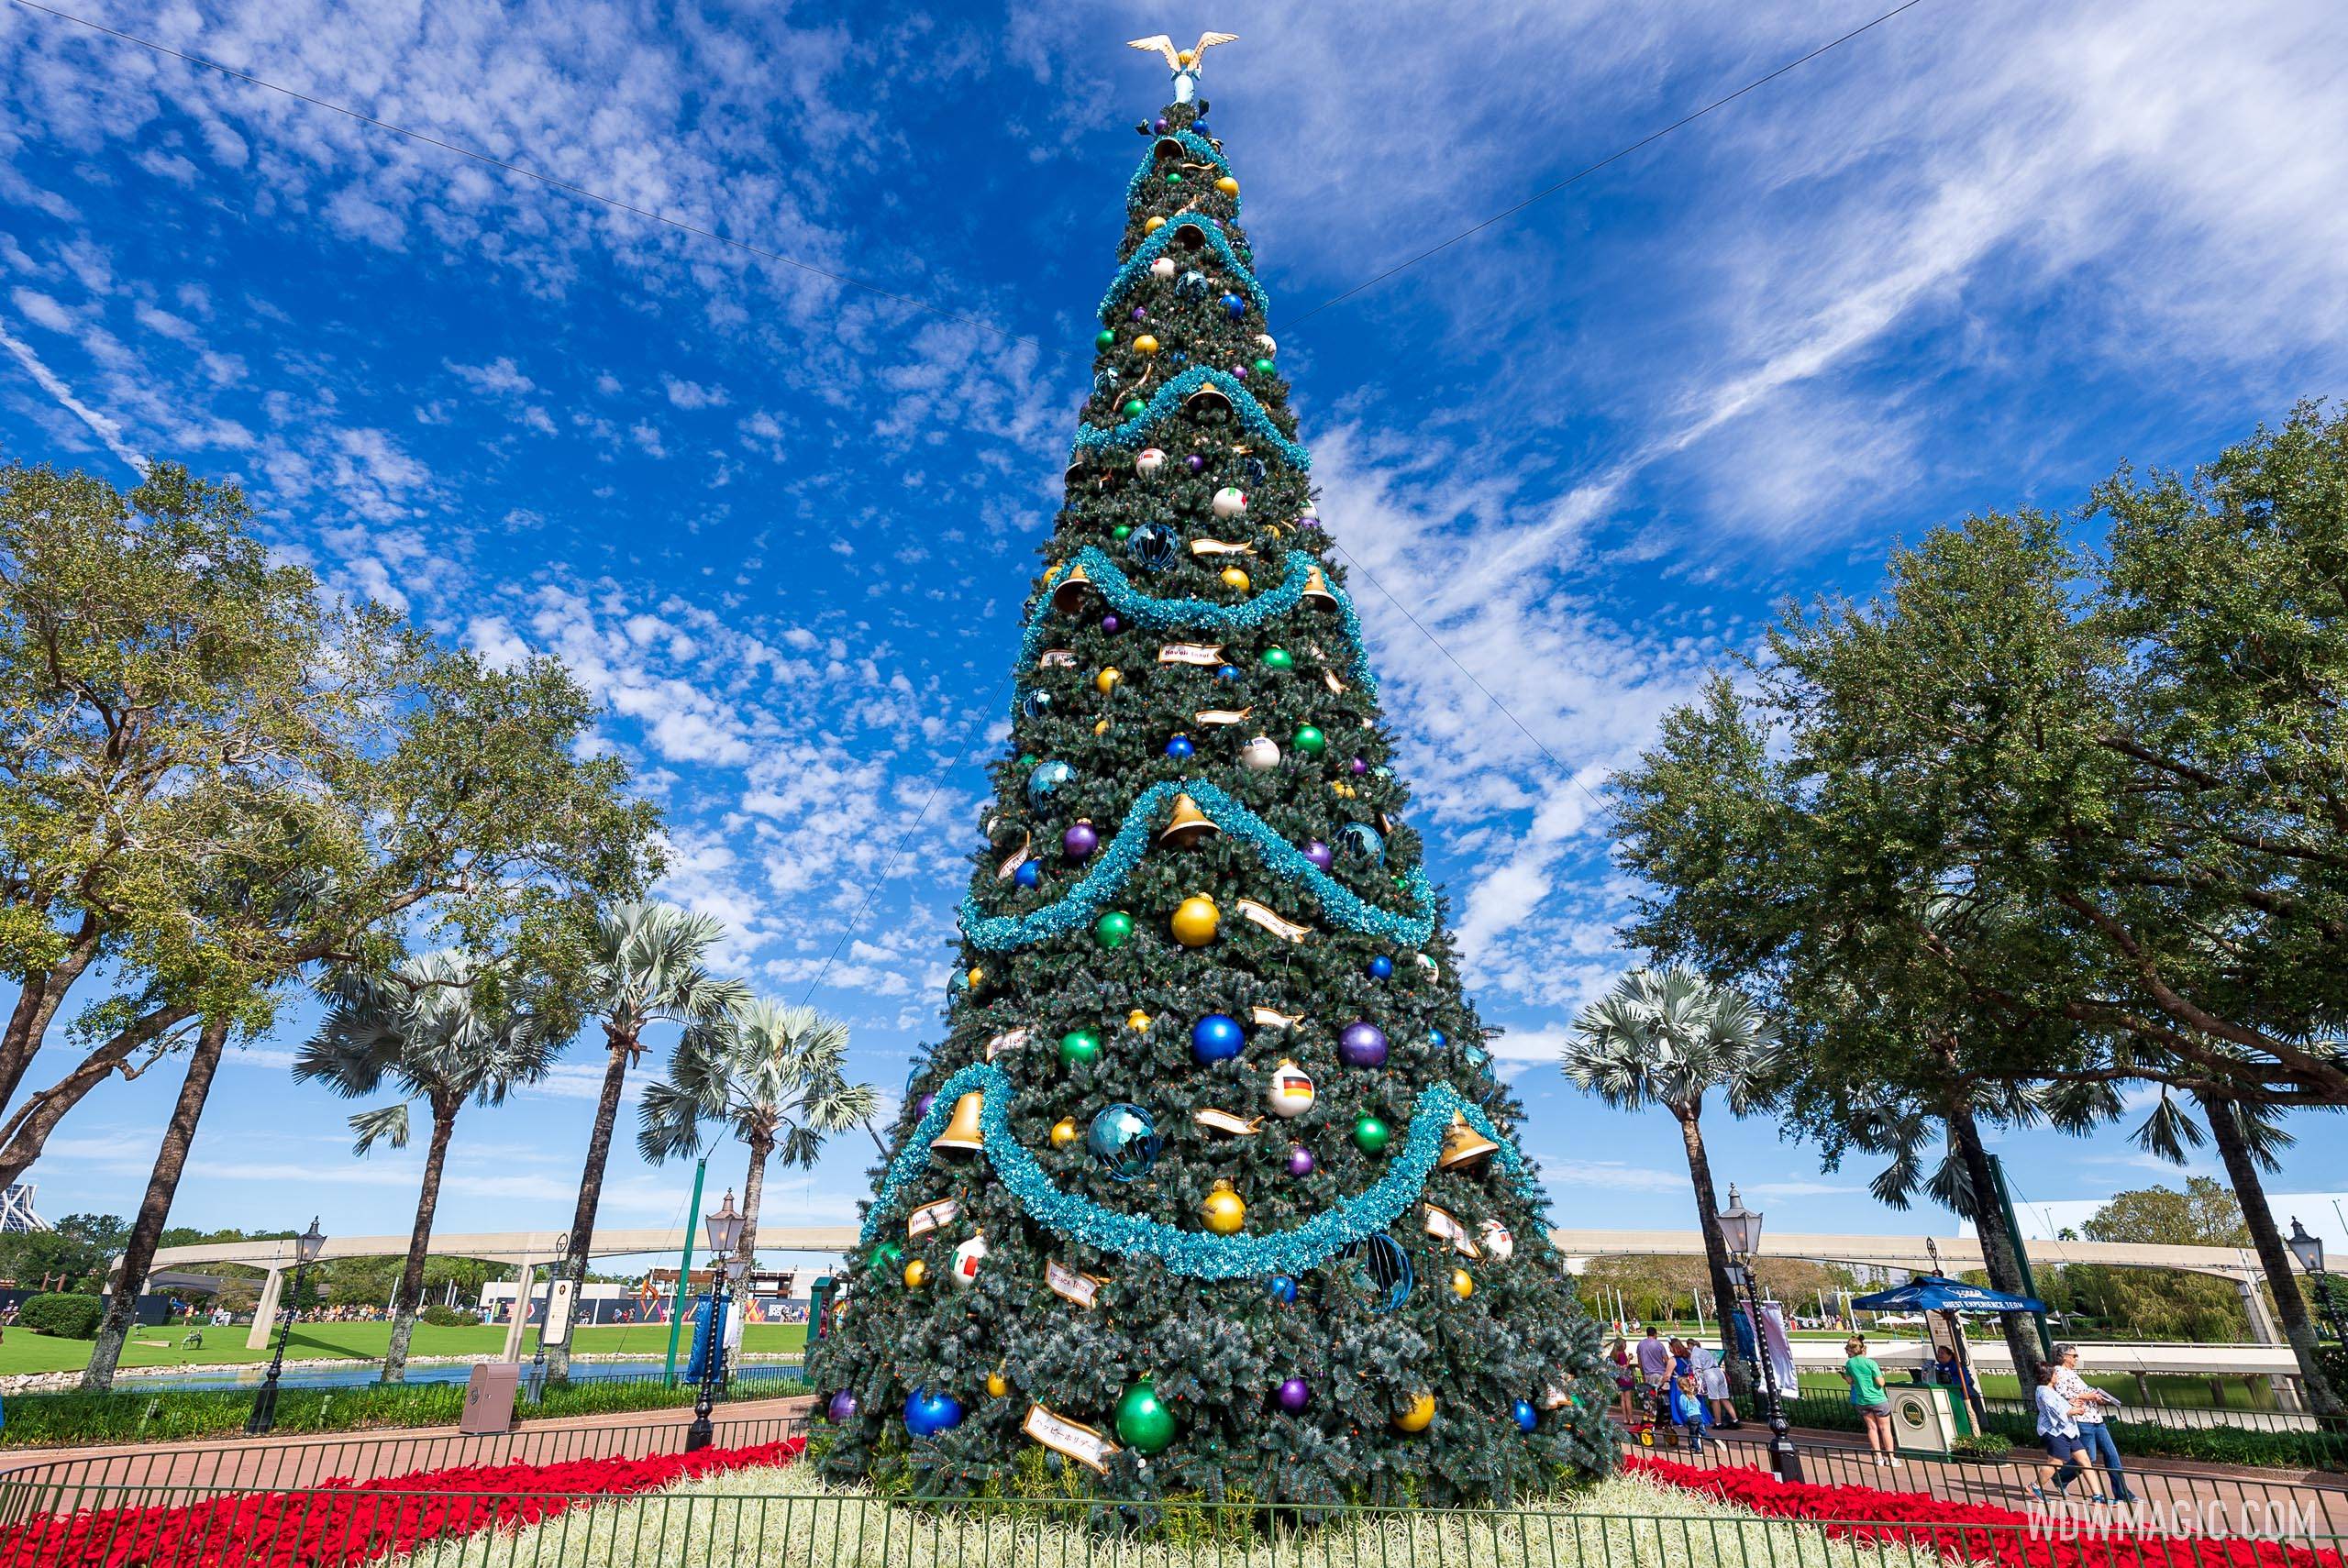 Temperatures below freezing are expected as the Disney World parks open this weekend